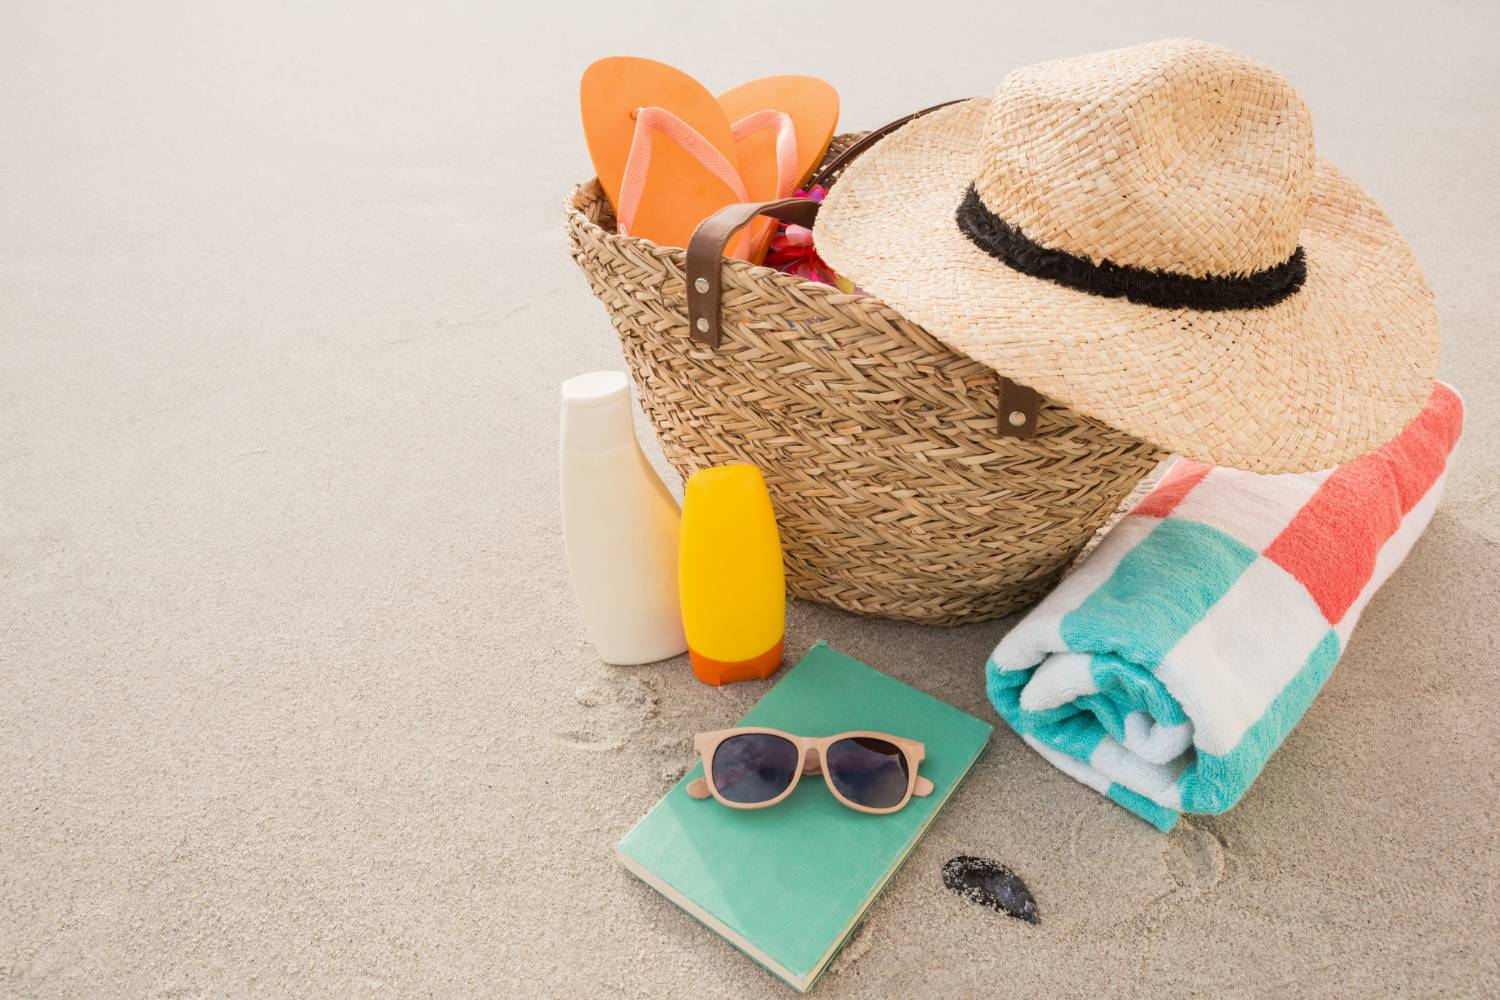 Beach essentials with a straw hat, suggesting a sunny day planned with a Panama City pontoon rental.